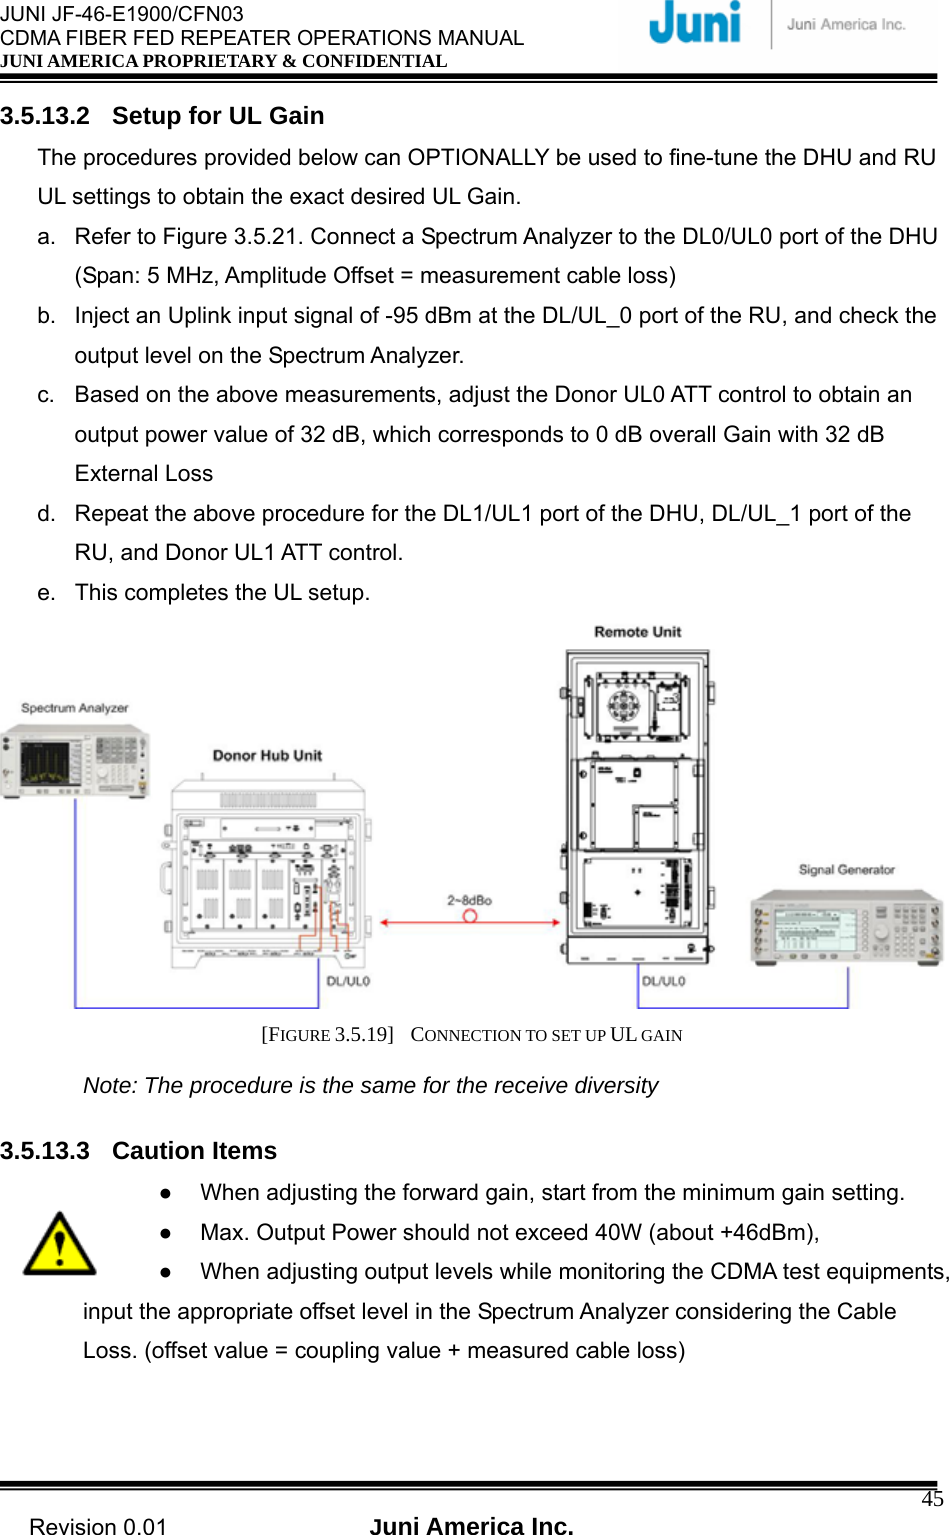  JUNI JF-46-E1900/CFN03 CDMA FIBER FED REPEATER OPERATIONS MANUAL JUNI AMERICA PROPRIETARY &amp; CONFIDENTIAL                                   Revision 0.01  Juni America Inc.  453.5.13.2  Setup for UL Gain The procedures provided below can OPTIONALLY be used to fine-tune the DHU and RU UL settings to obtain the exact desired UL Gain. a.  Refer to Figure 3.5.21. Connect a Spectrum Analyzer to the DL0/UL0 port of the DHU (Span: 5 MHz, Amplitude Offset = measurement cable loss) b.  Inject an Uplink input signal of -95 dBm at the DL/UL_0 port of the RU, and check the output level on the Spectrum Analyzer.     c.  Based on the above measurements, adjust the Donor UL0 ATT control to obtain an output power value of 32 dB, which corresponds to 0 dB overall Gain with 32 dB External Loss d.  Repeat the above procedure for the DL1/UL1 port of the DHU, DL/UL_1 port of the RU, and Donor UL1 ATT control. e.  This completes the UL setup.  [FIGURE 3.5.19]  CONNECTION TO SET UP UL GAIN  Note: The procedure is the same for the receive diversity  3.5.13.3 Caution Items ●  When adjusting the forward gain, start from the minimum gain setting. ●  Max. Output Power should not exceed 40W (about +46dBm), ●  When adjusting output levels while monitoring the CDMA test equipments, input the appropriate offset level in the Spectrum Analyzer considering the Cable Loss. (offset value = coupling value + measured cable loss)  